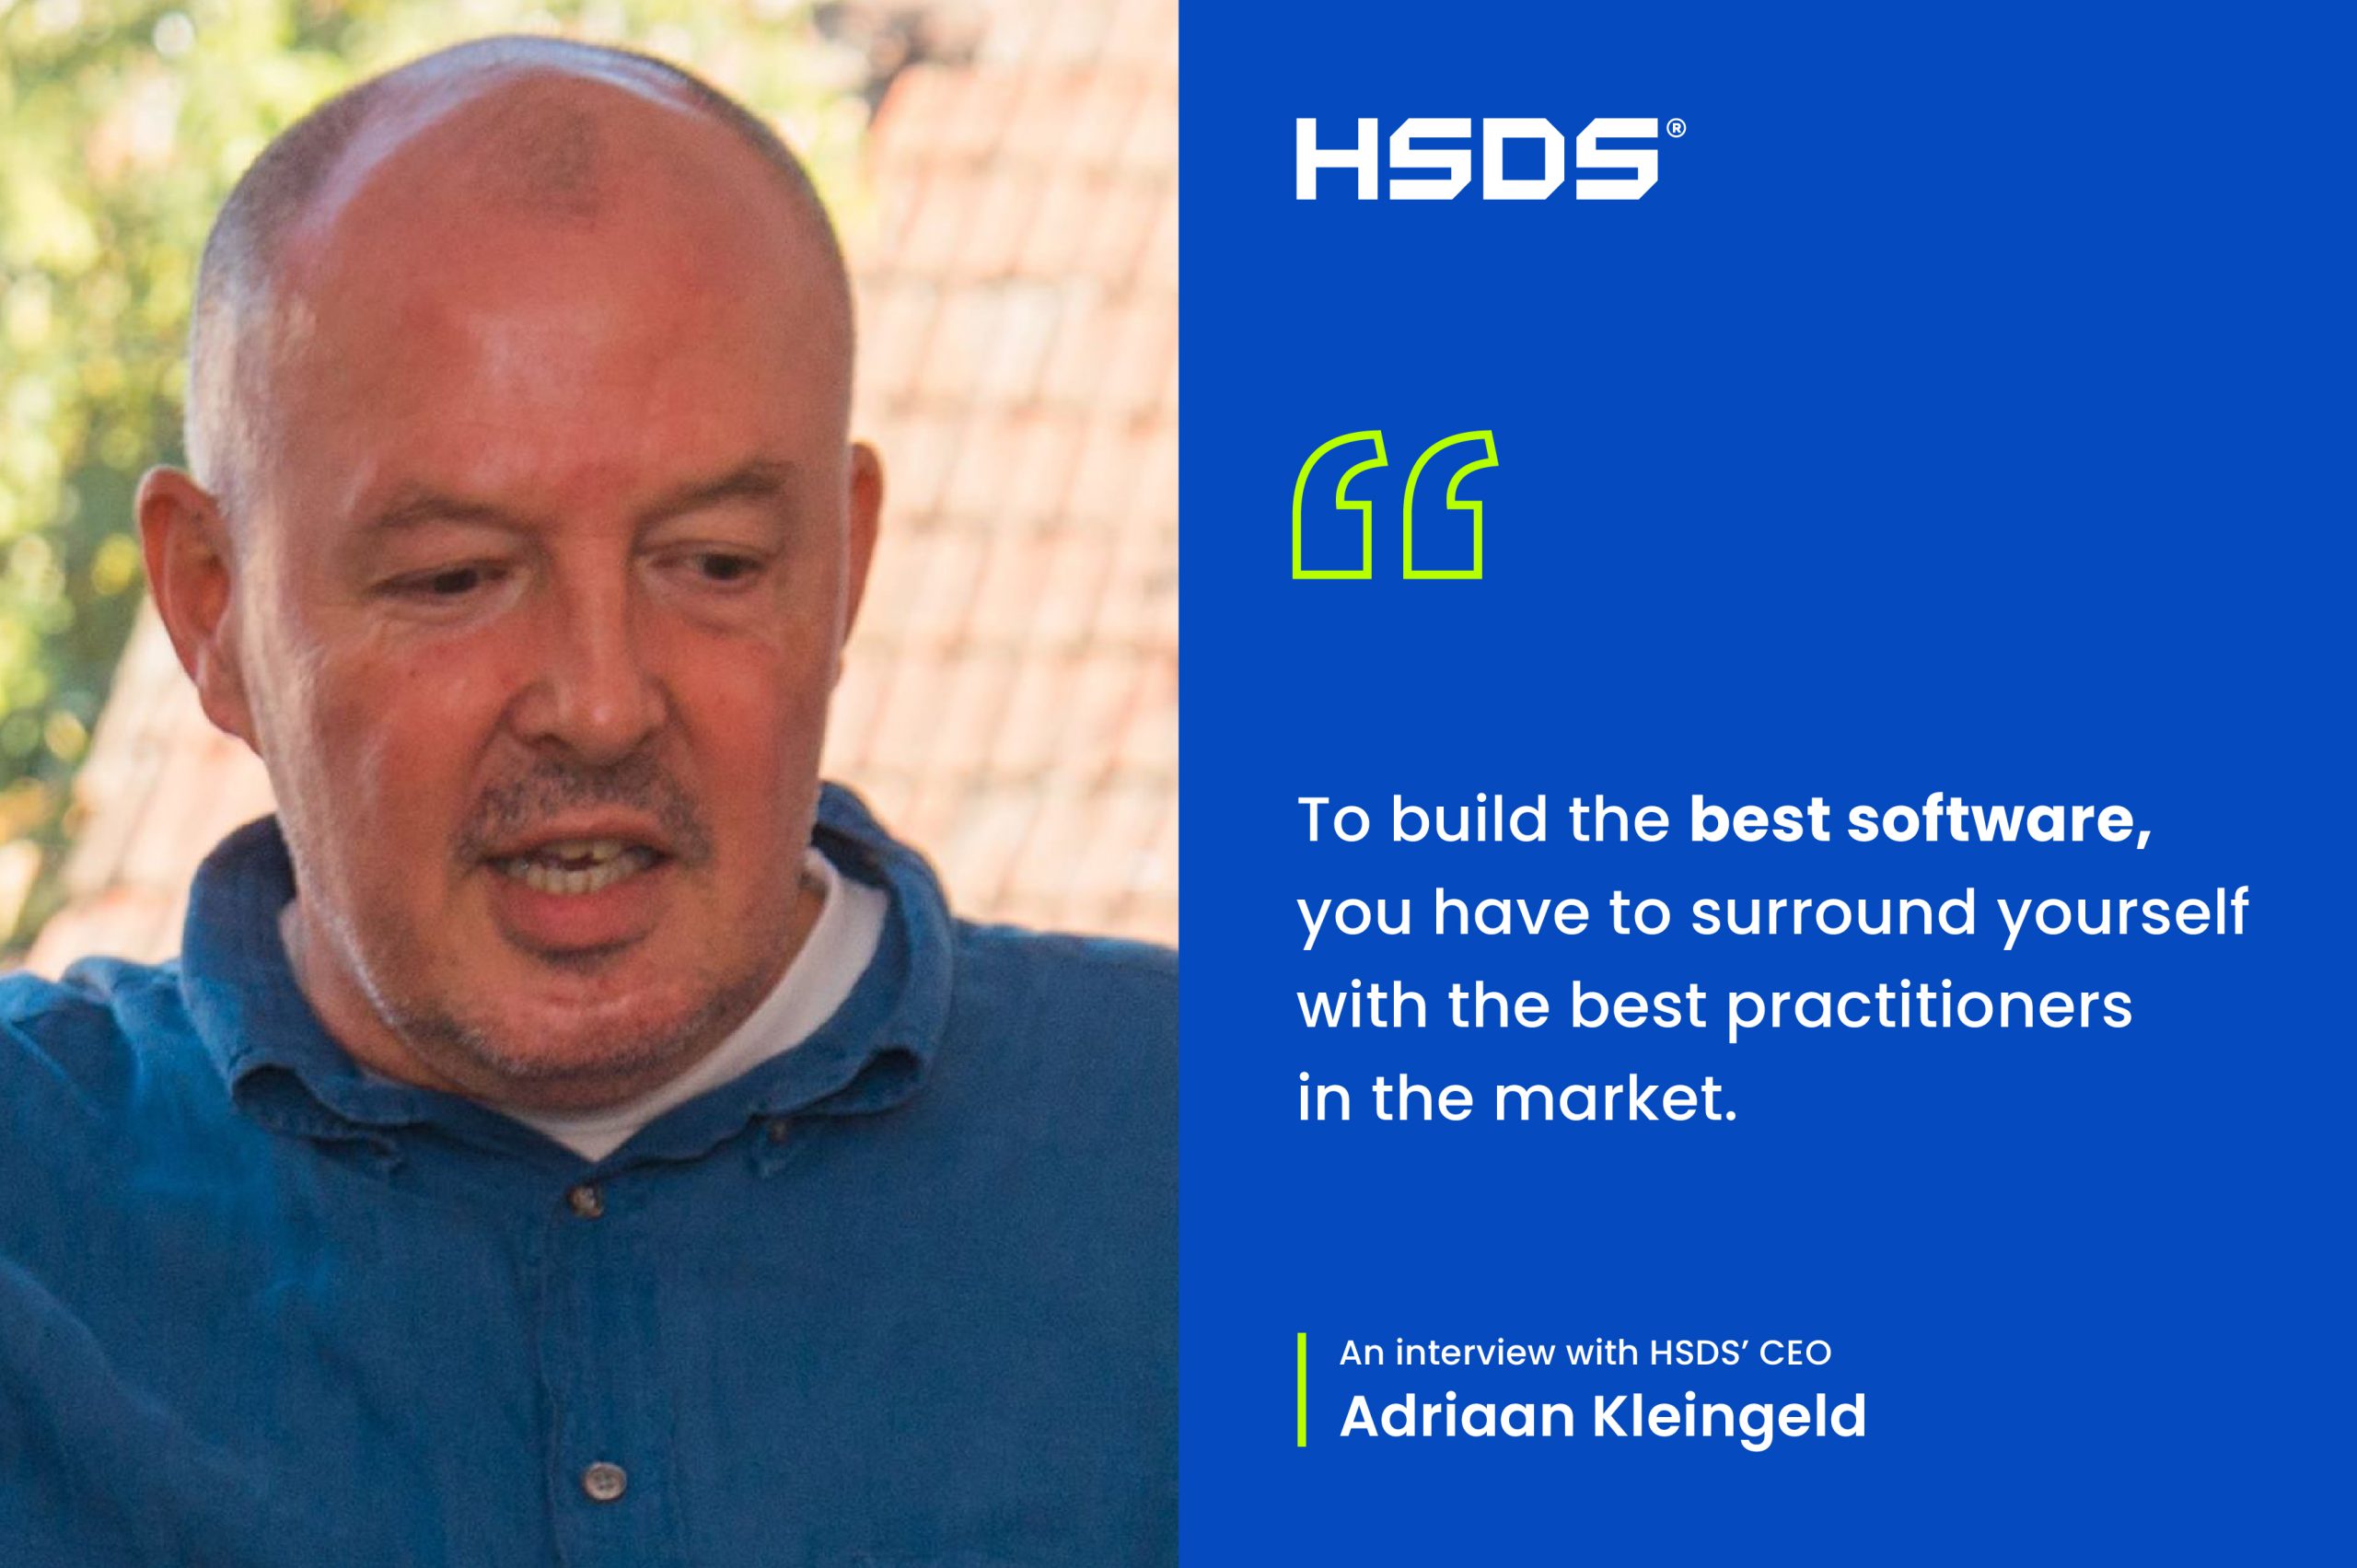 “To Build the Best Software You Have To Surround Yourself With the Best Practitioners in the Market” – an Interview With HSDS’ CEO – Adriaan Kleingeld